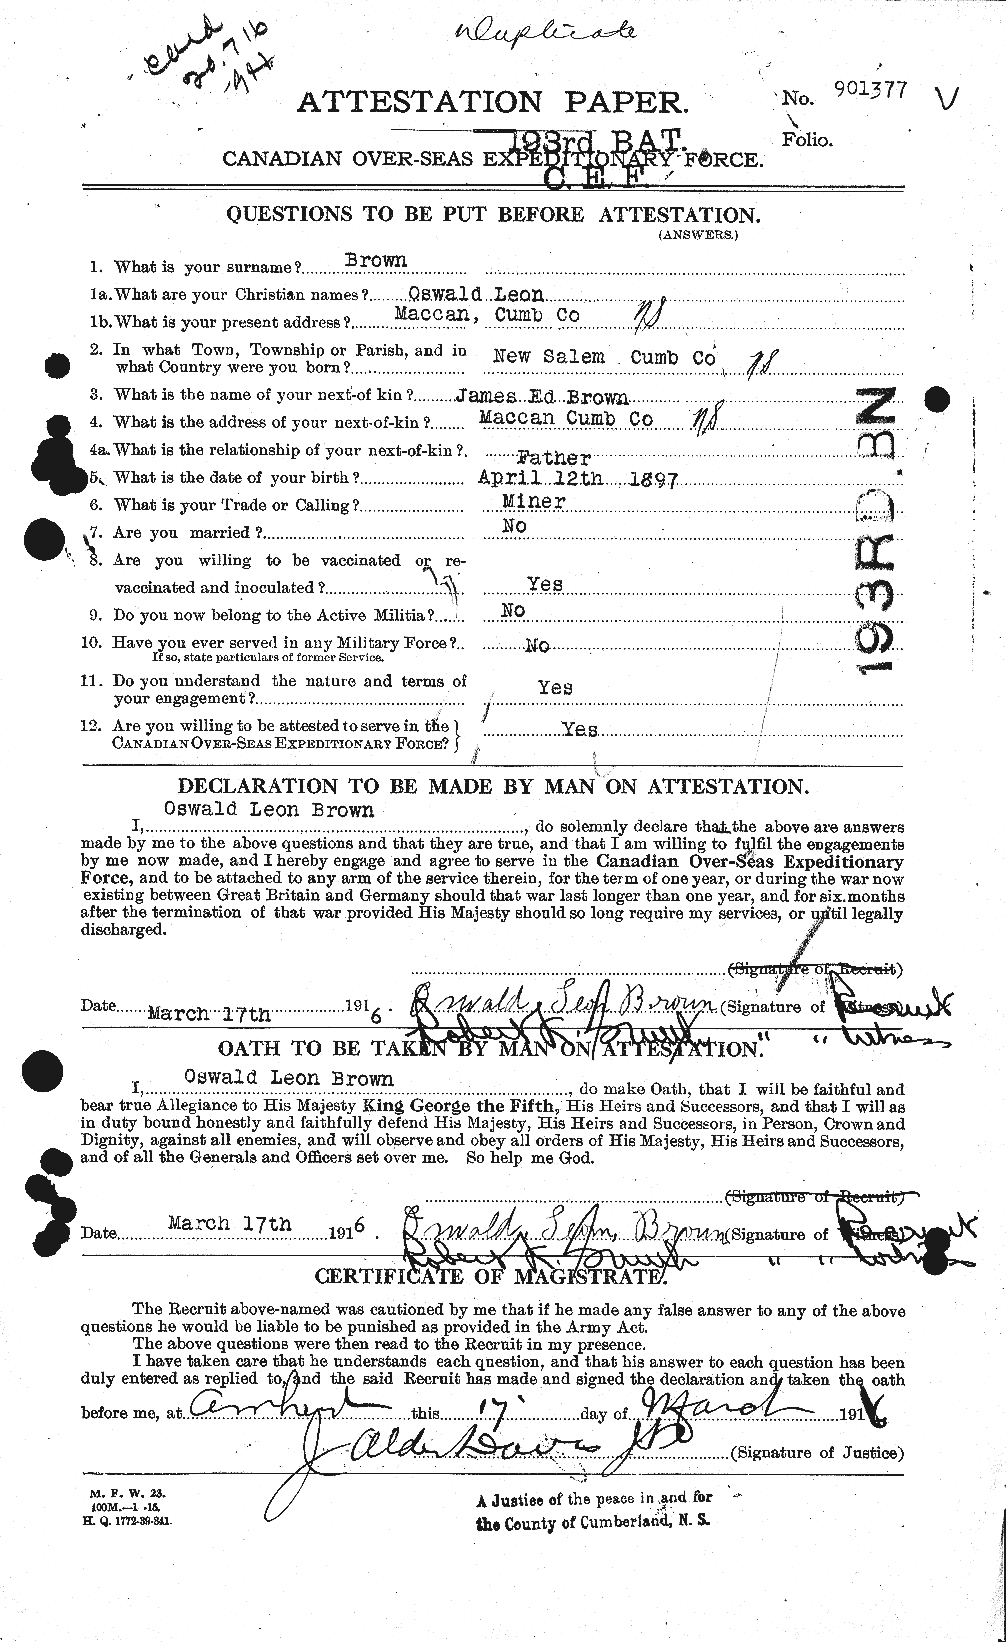 Personnel Records of the First World War - CEF 267143a